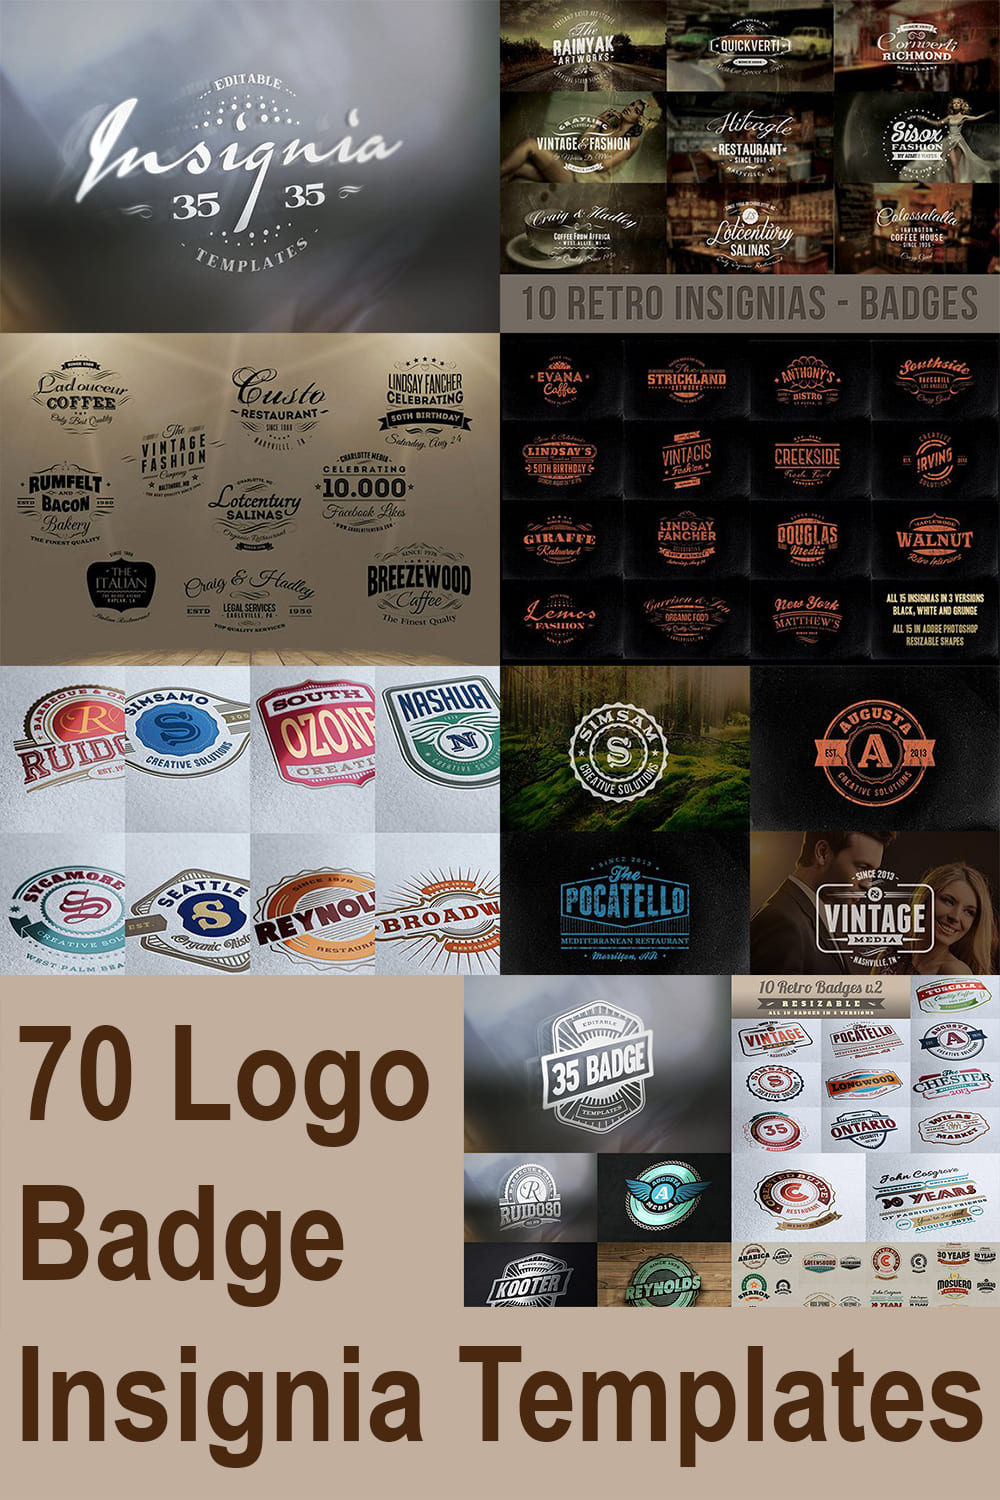 Badges for different style.